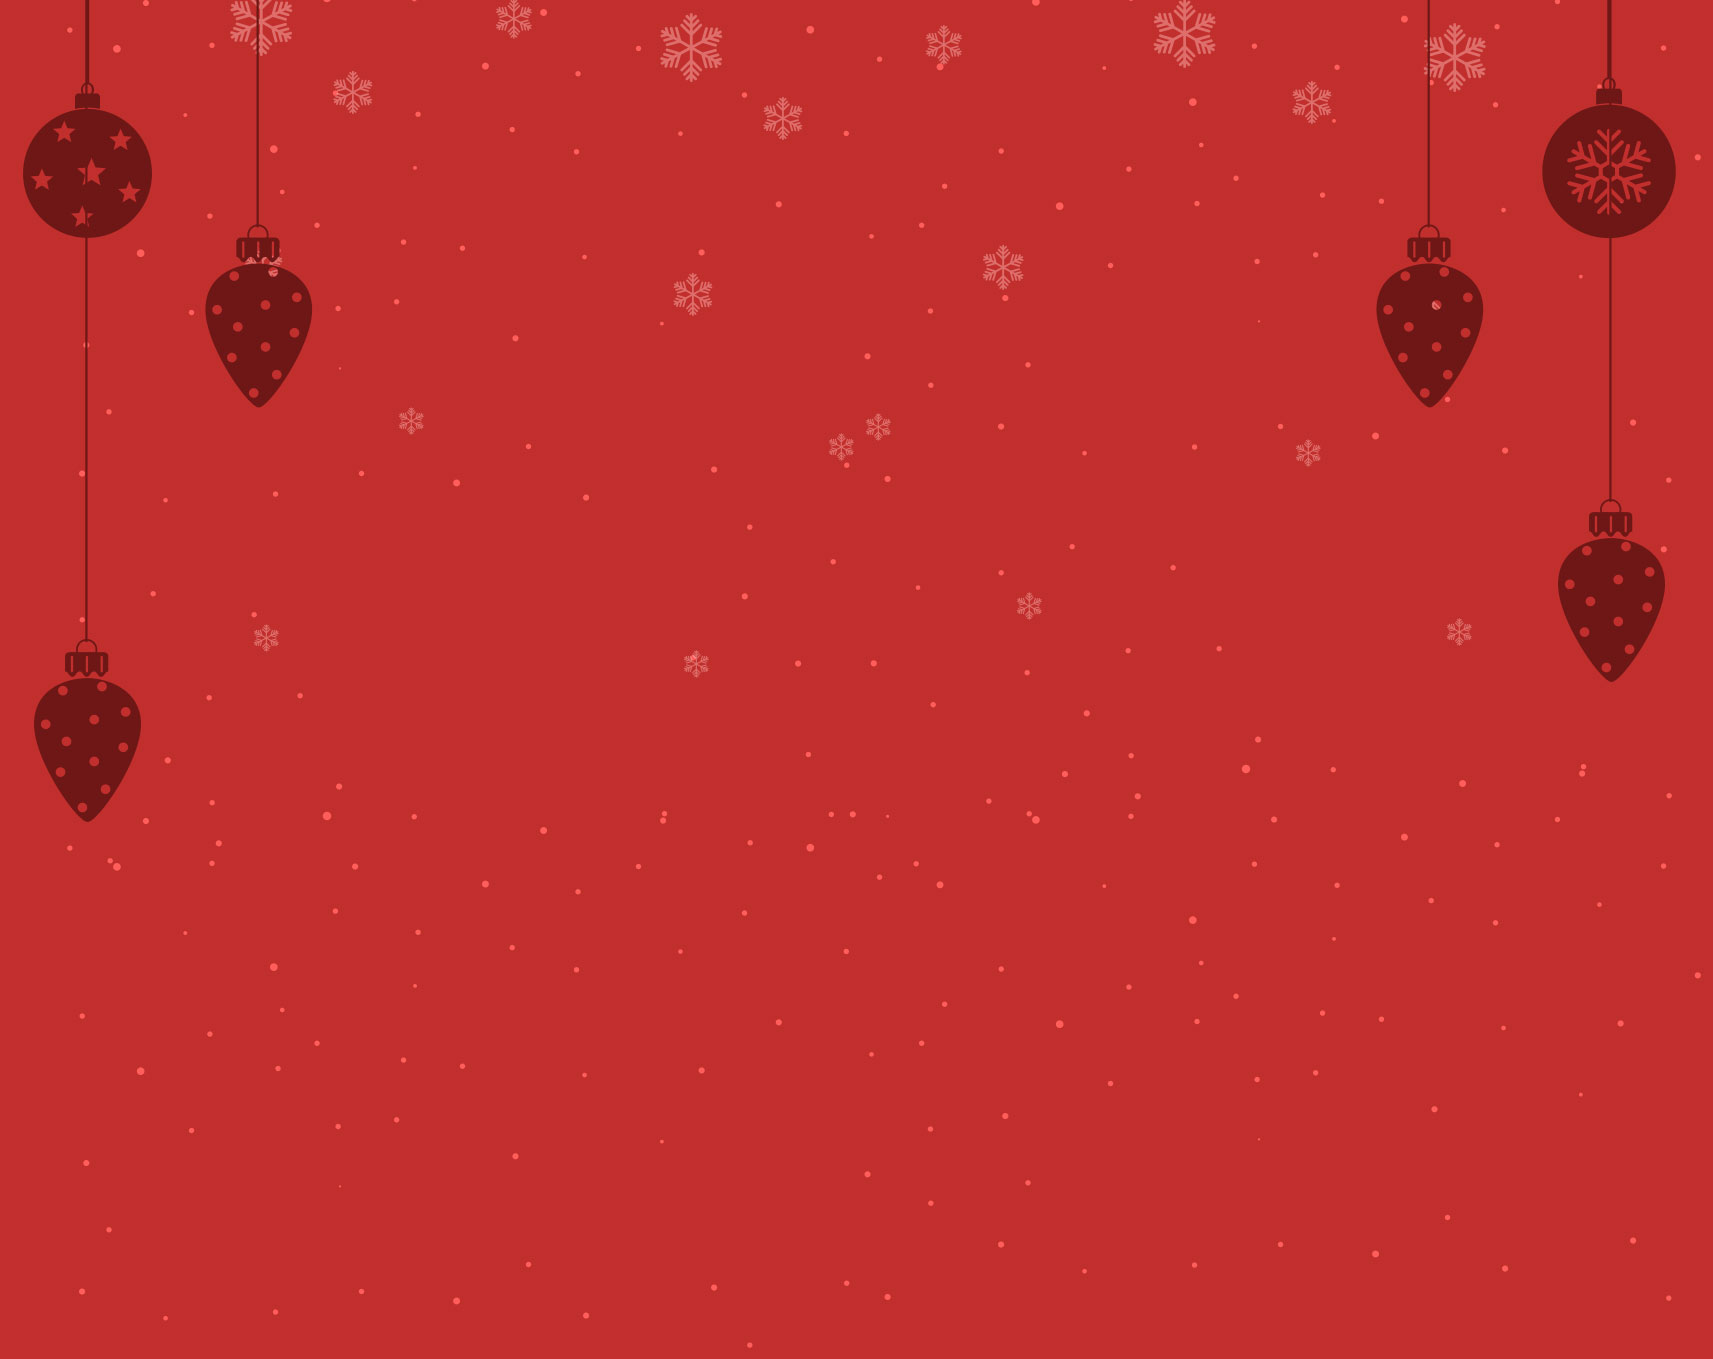 Offer-Page-Christmas-Deals-Background - Next Step Beauty